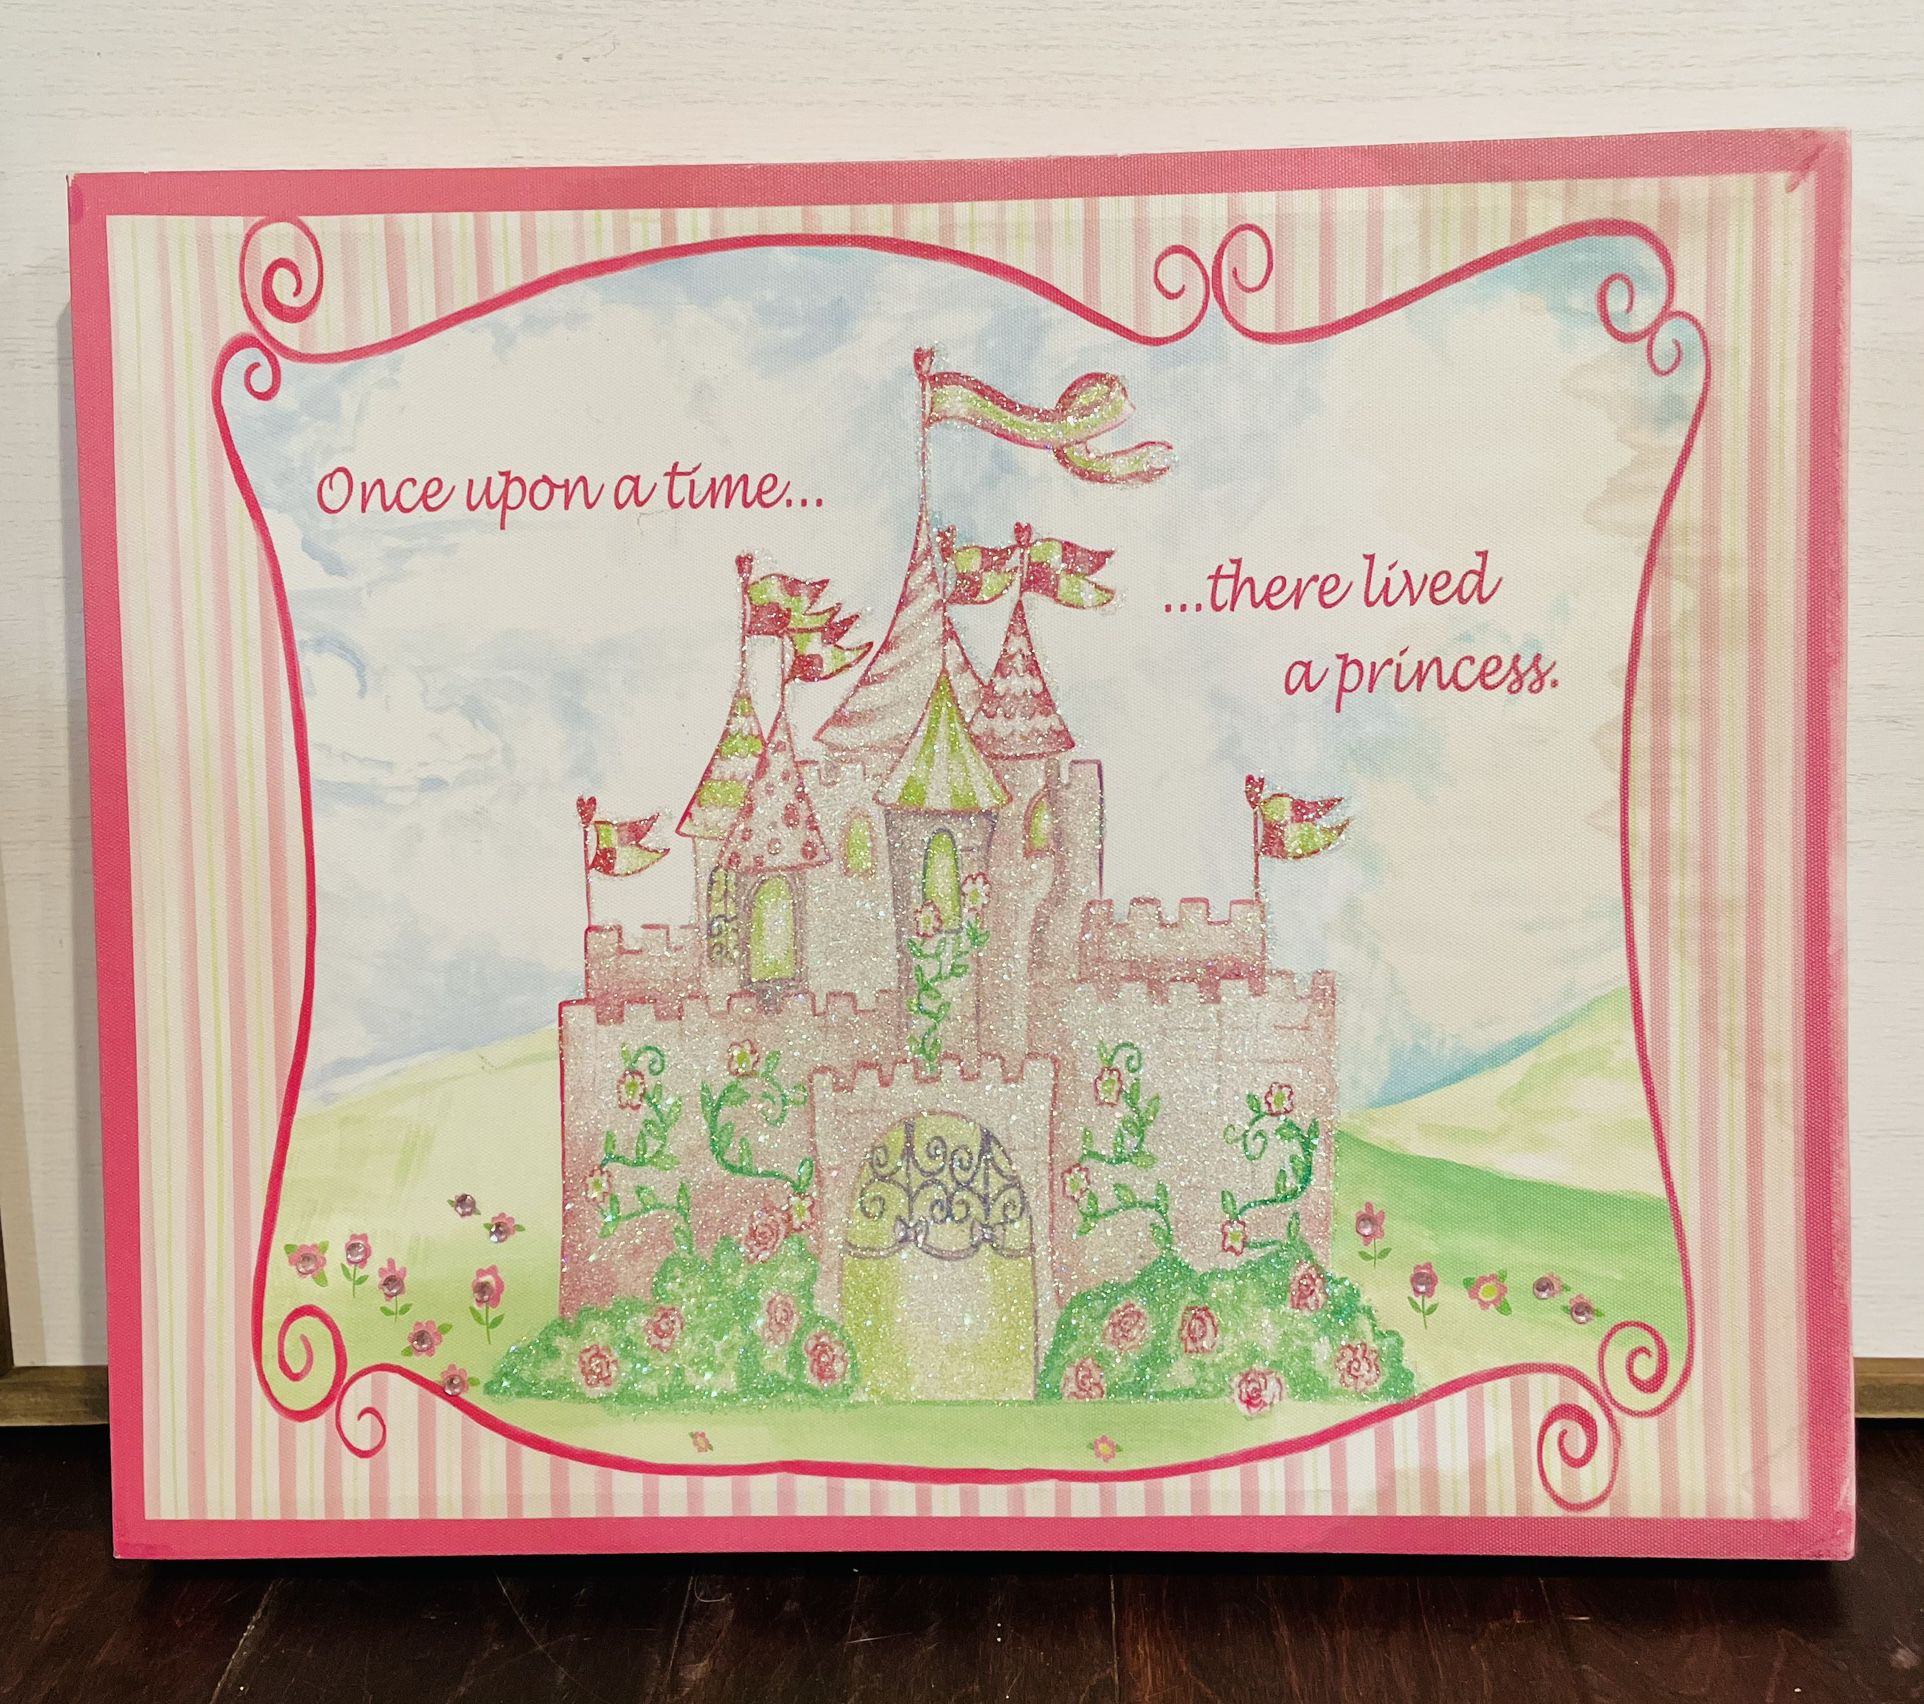 Girl’s Nursery/Bedroom  Decor: “Once Upon a Time….There Lived a Princess”; Size: 16”H x 20”W x 1.5”D; Horizontal/Landscape Orientation